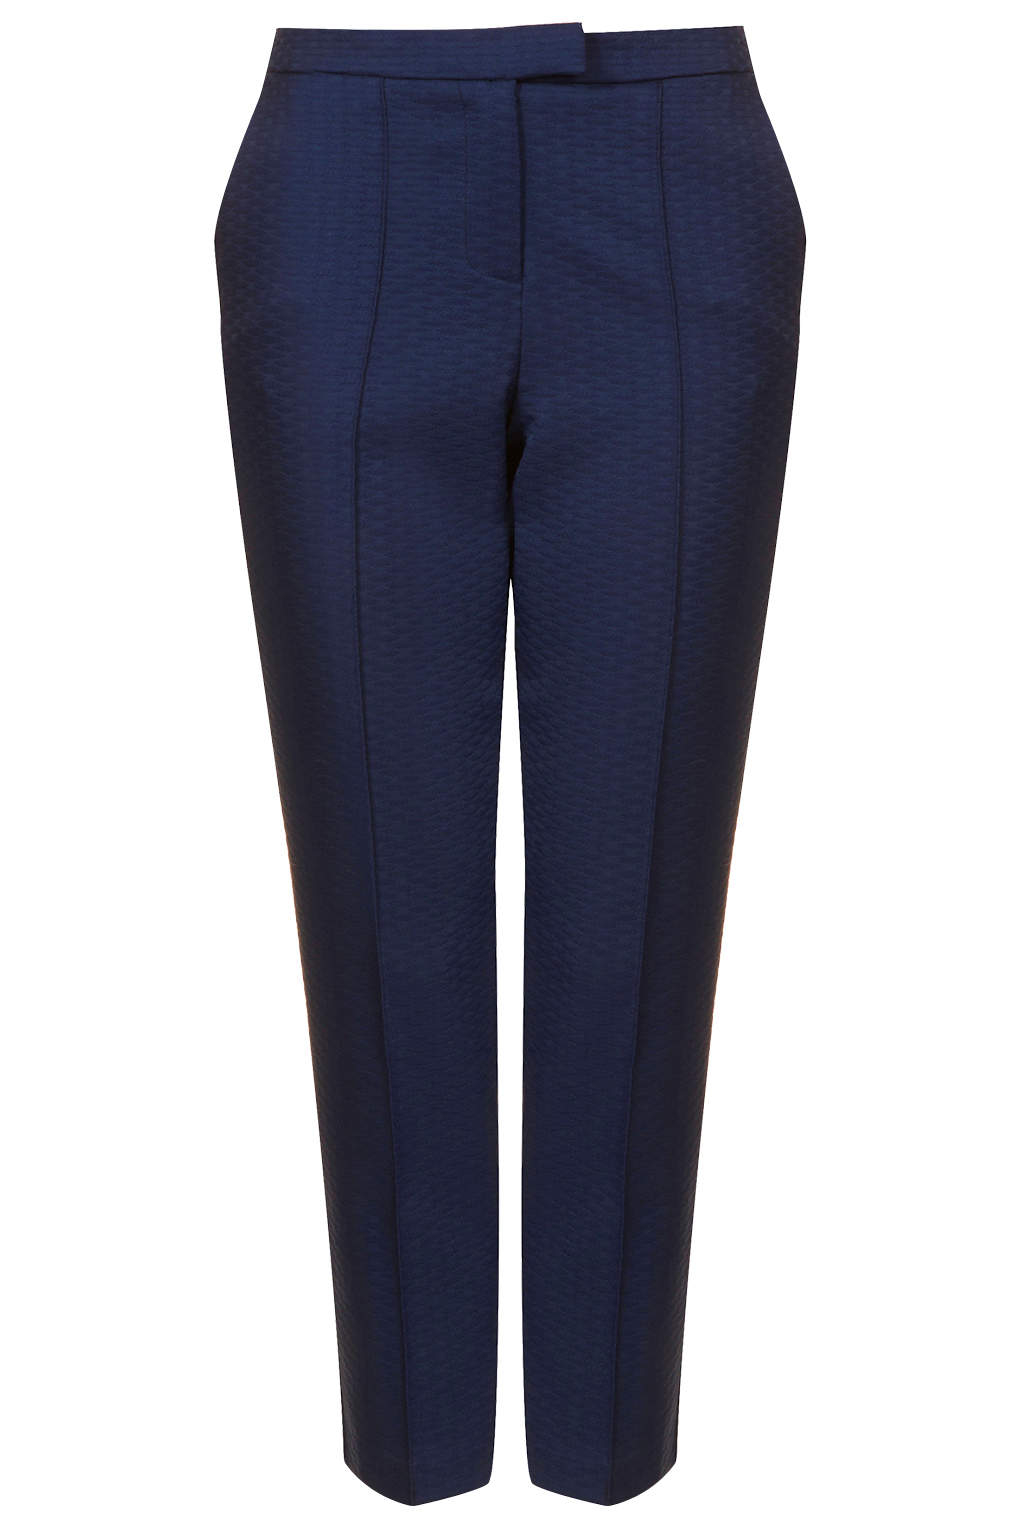 Topshop Petite Textured Cigarette Trousers in Blue (NAVY BLUE) | Lyst